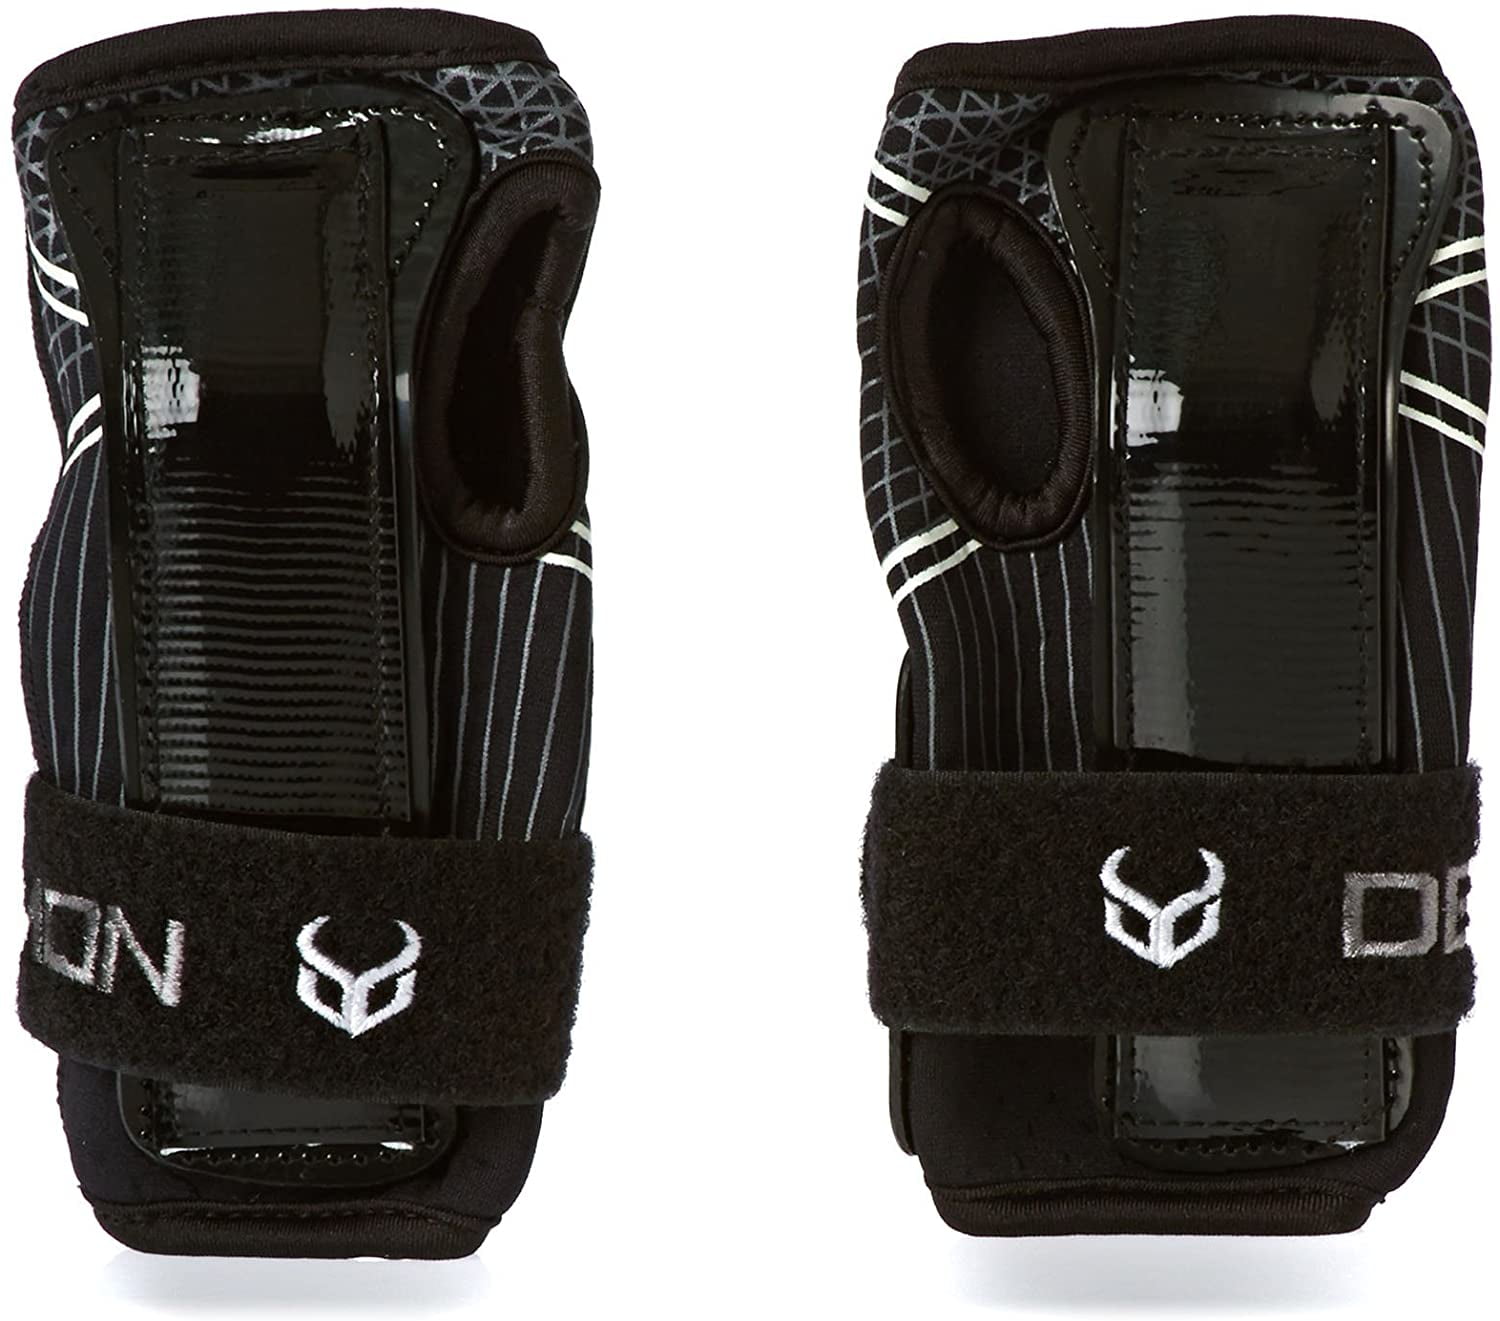 Demon Ds 6450 Unisex Body Armour Wrist Protector Black All Sizes 